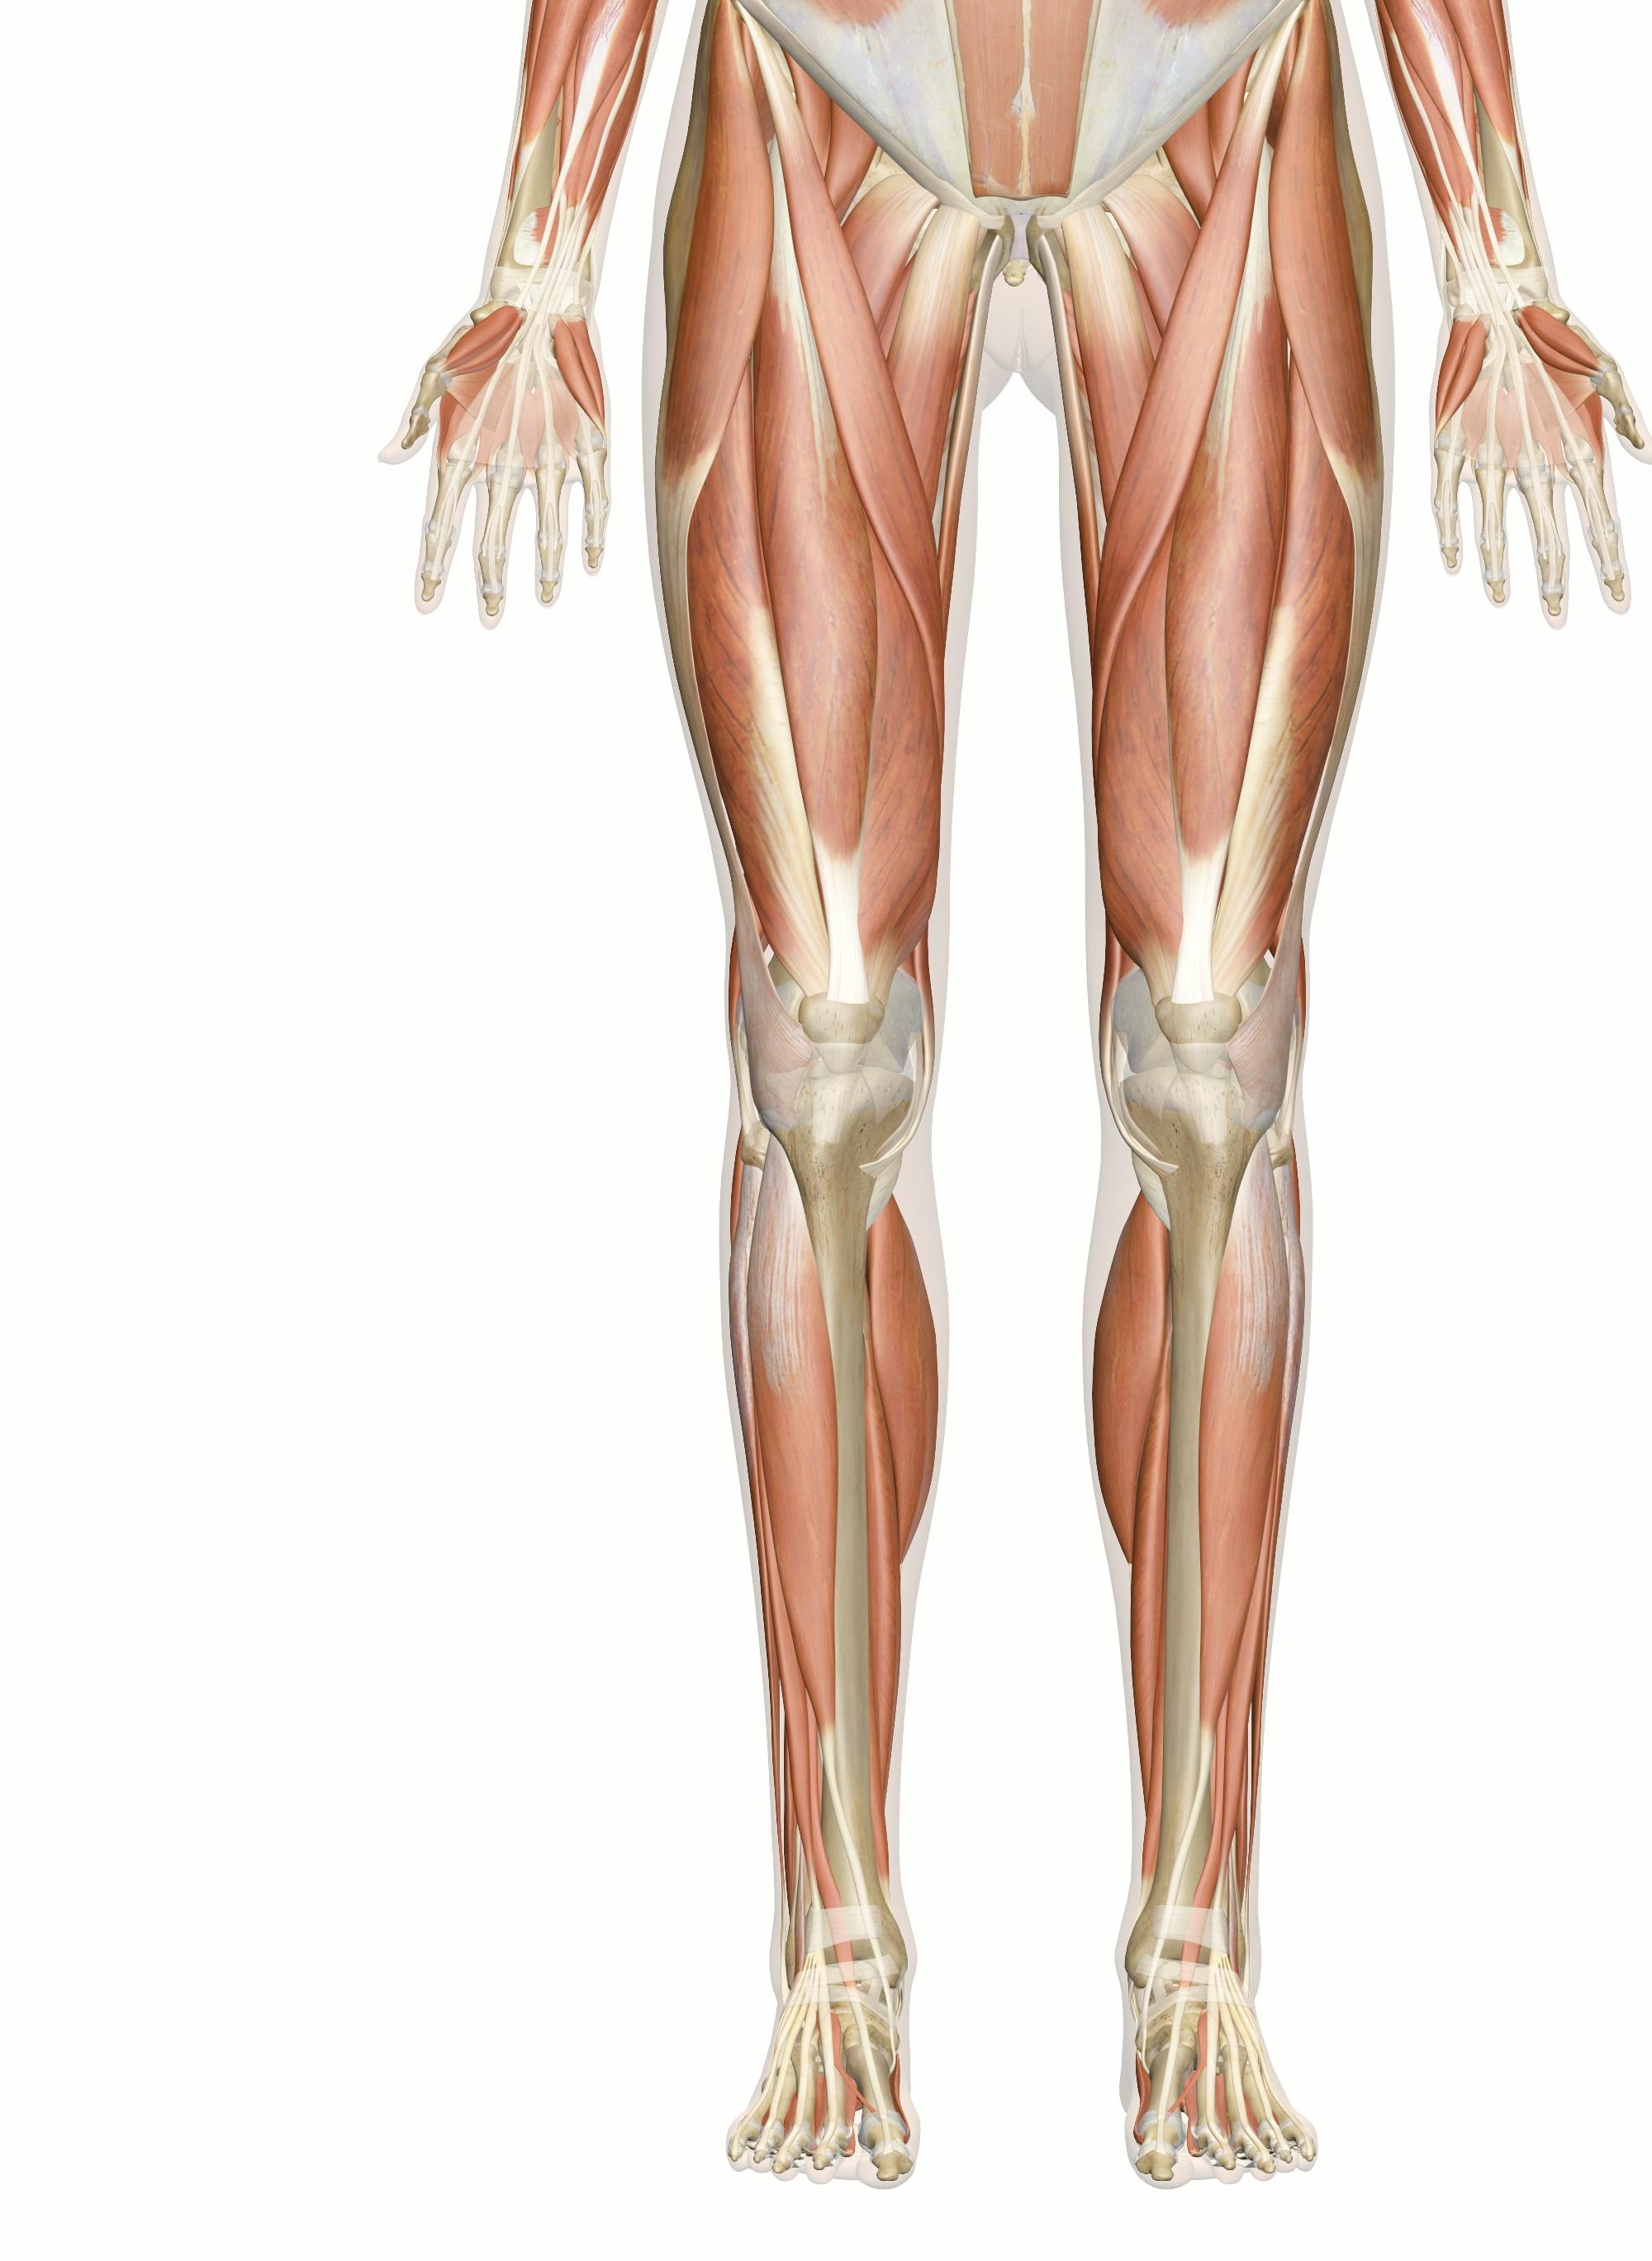 Muscles of the Pelvic Girdle & Lower Limbs: Structure, Movement